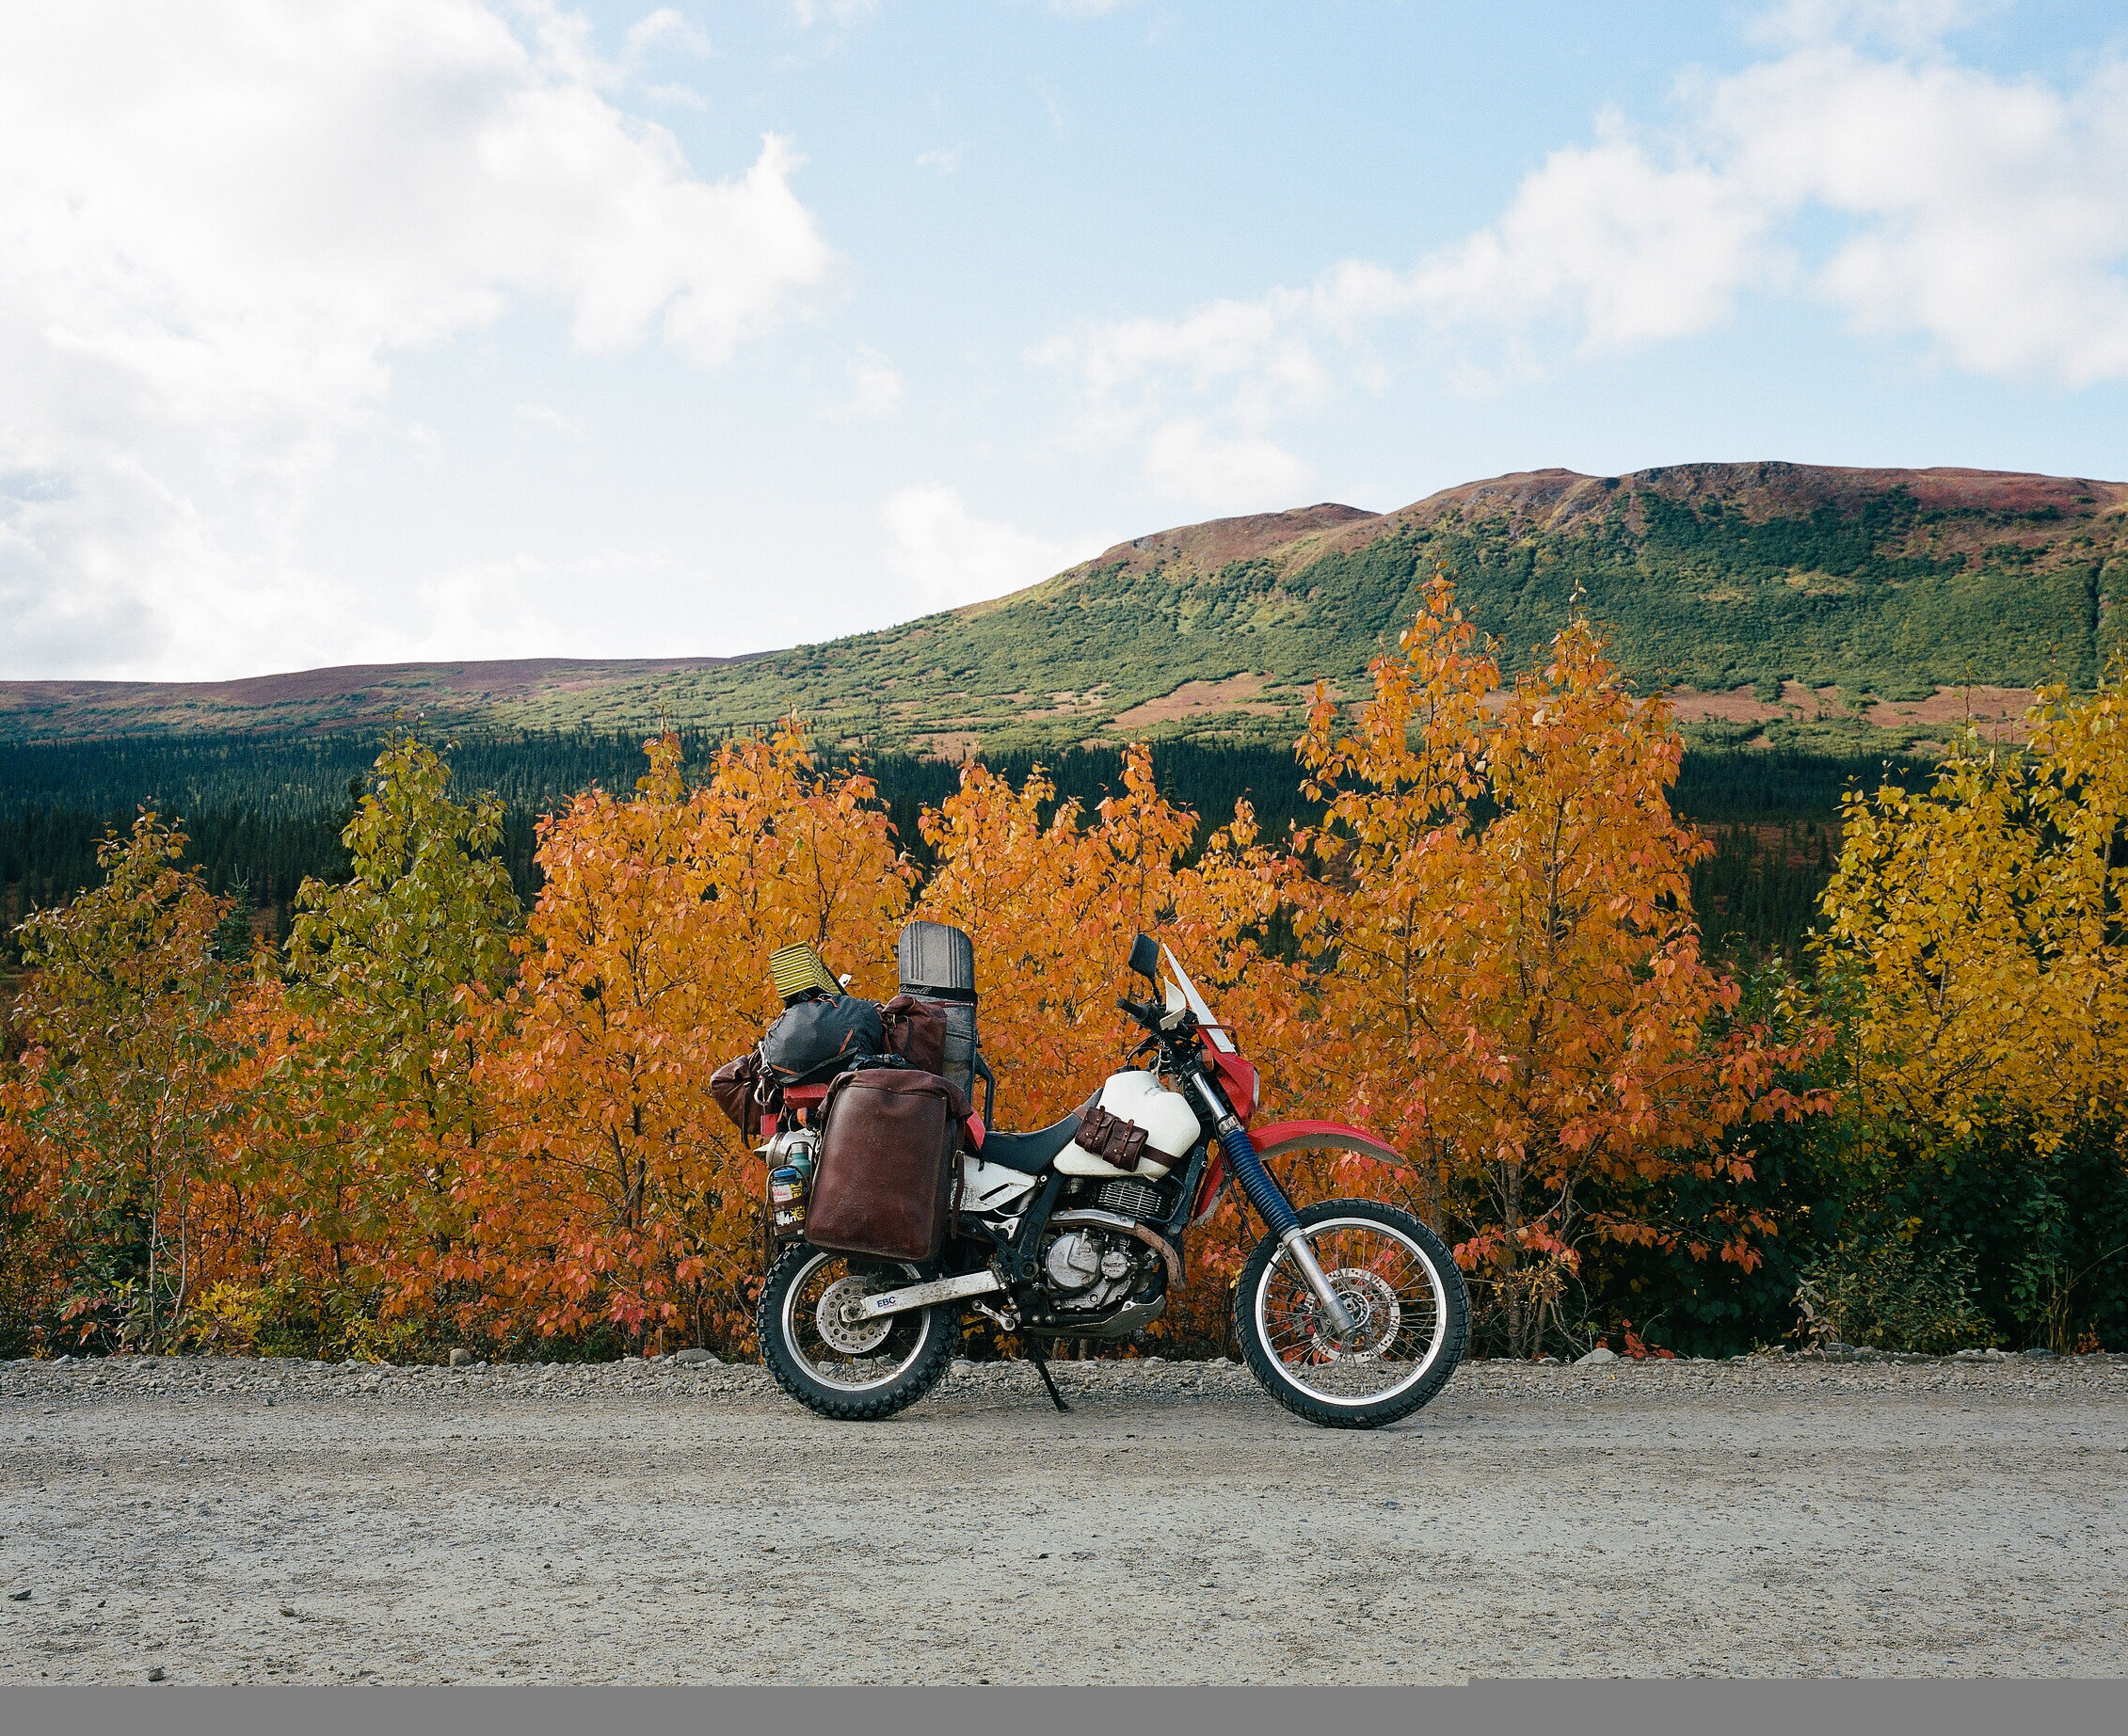  Motorcycle at side of the highway on an autumn day with mountains in background. 